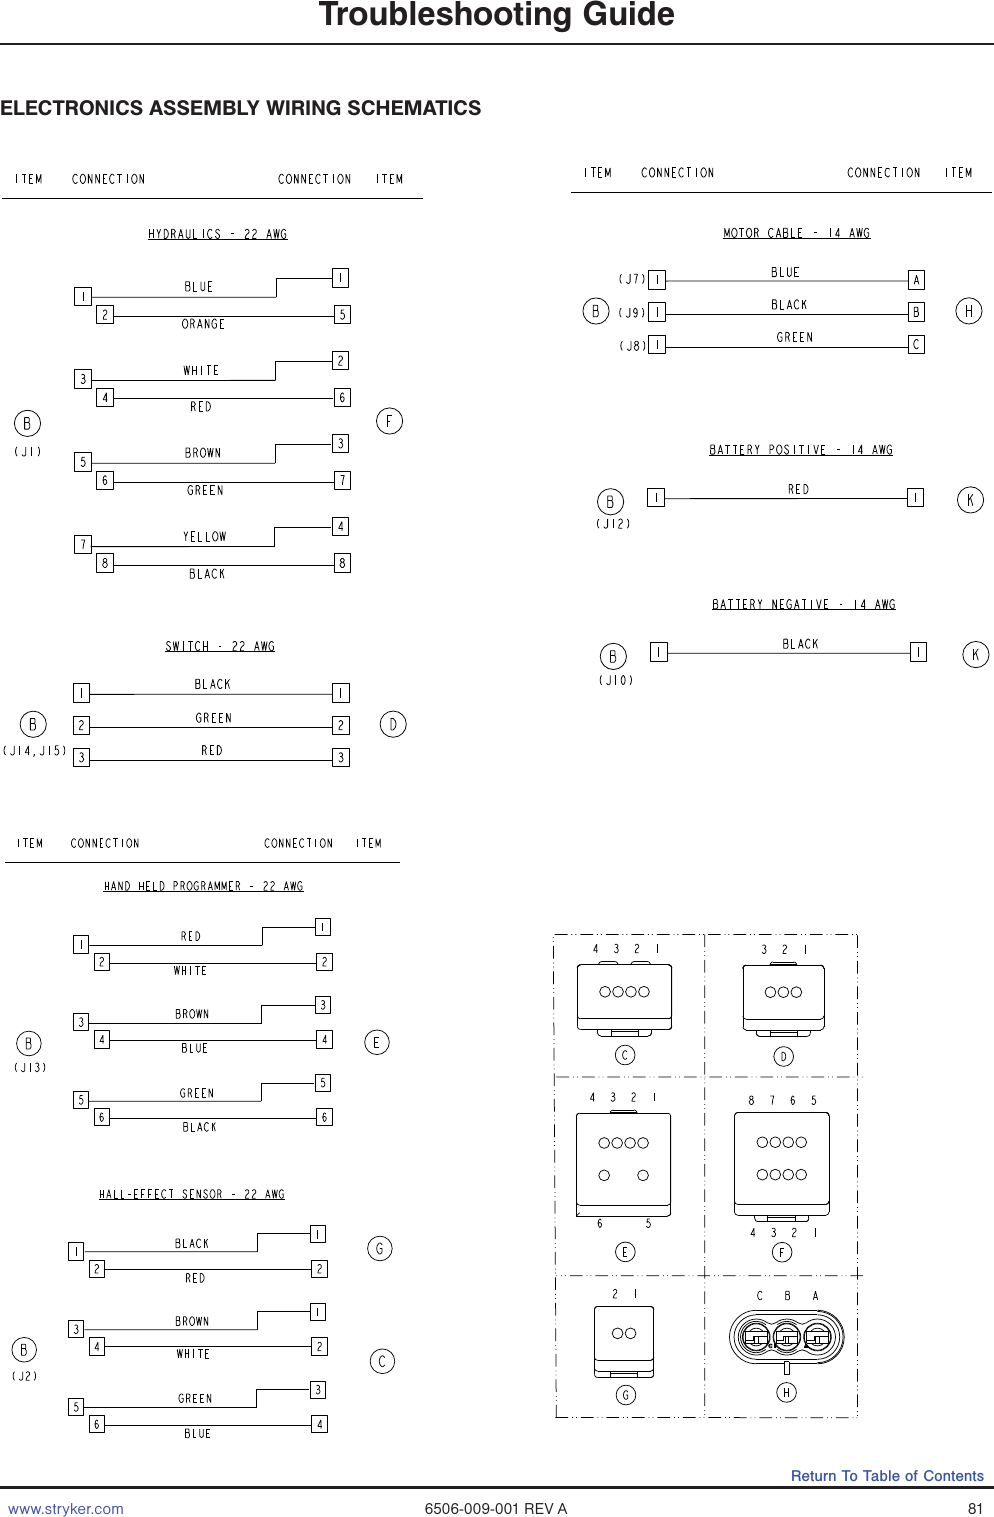 www.stryker.com 6506-009-001 REV A 81Return To Table of ContentsTroubleshooting GuideELECTRONICS ASSEMBLY WIRING SCHEMATICS